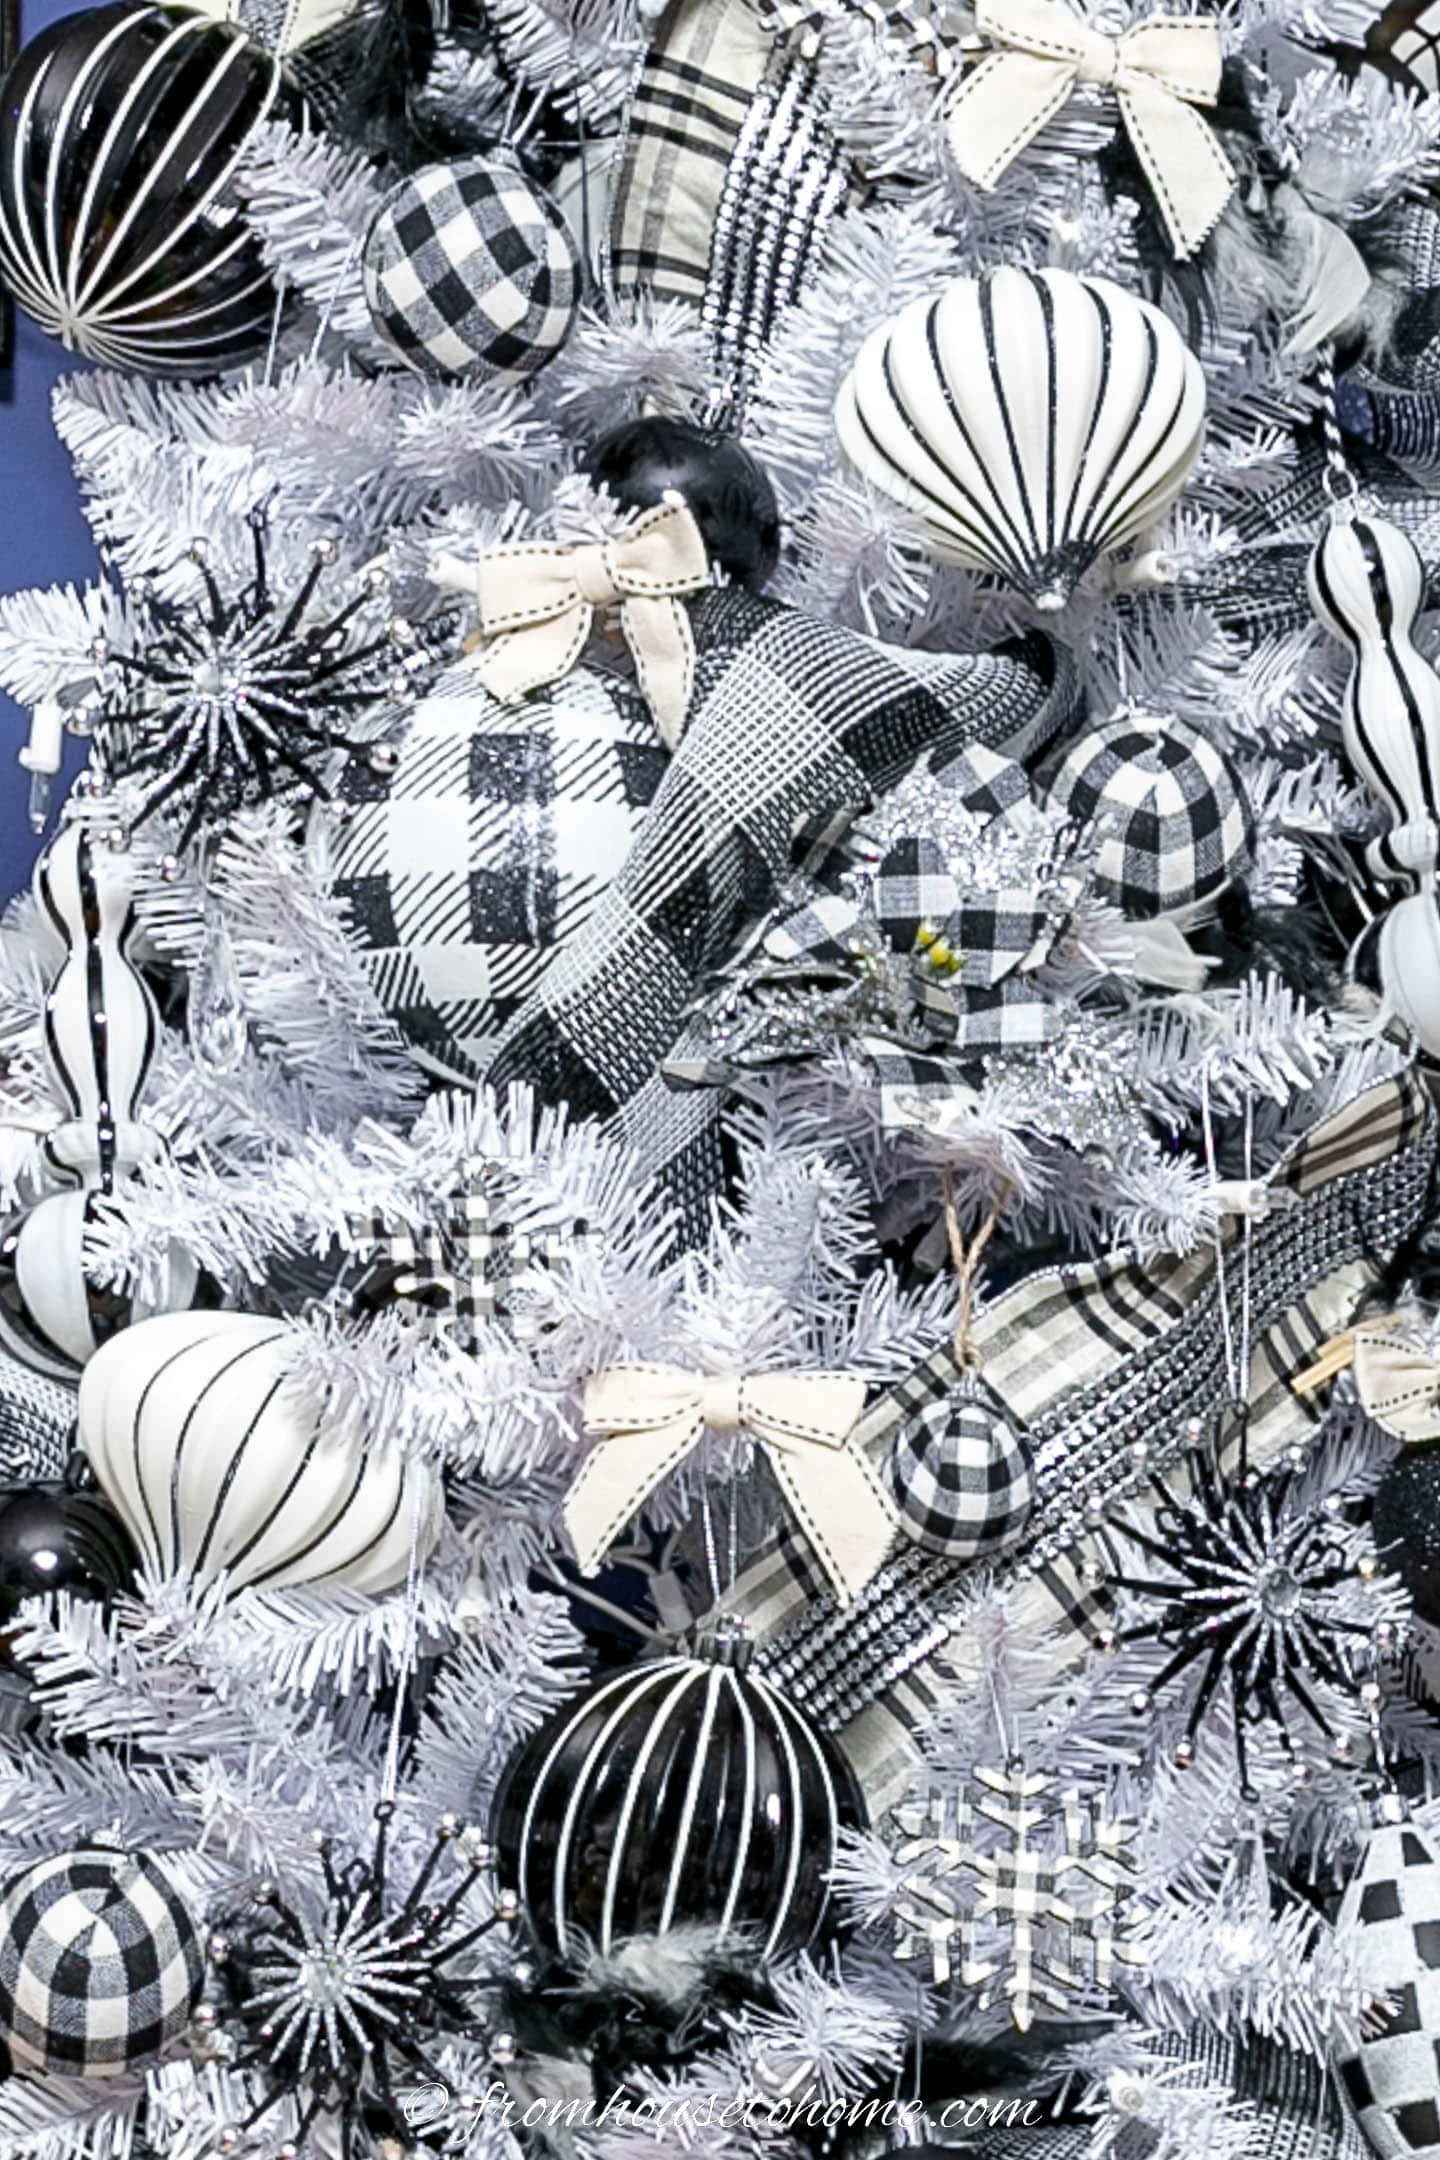 Close up of a white tree with black and white ornaments and white bows